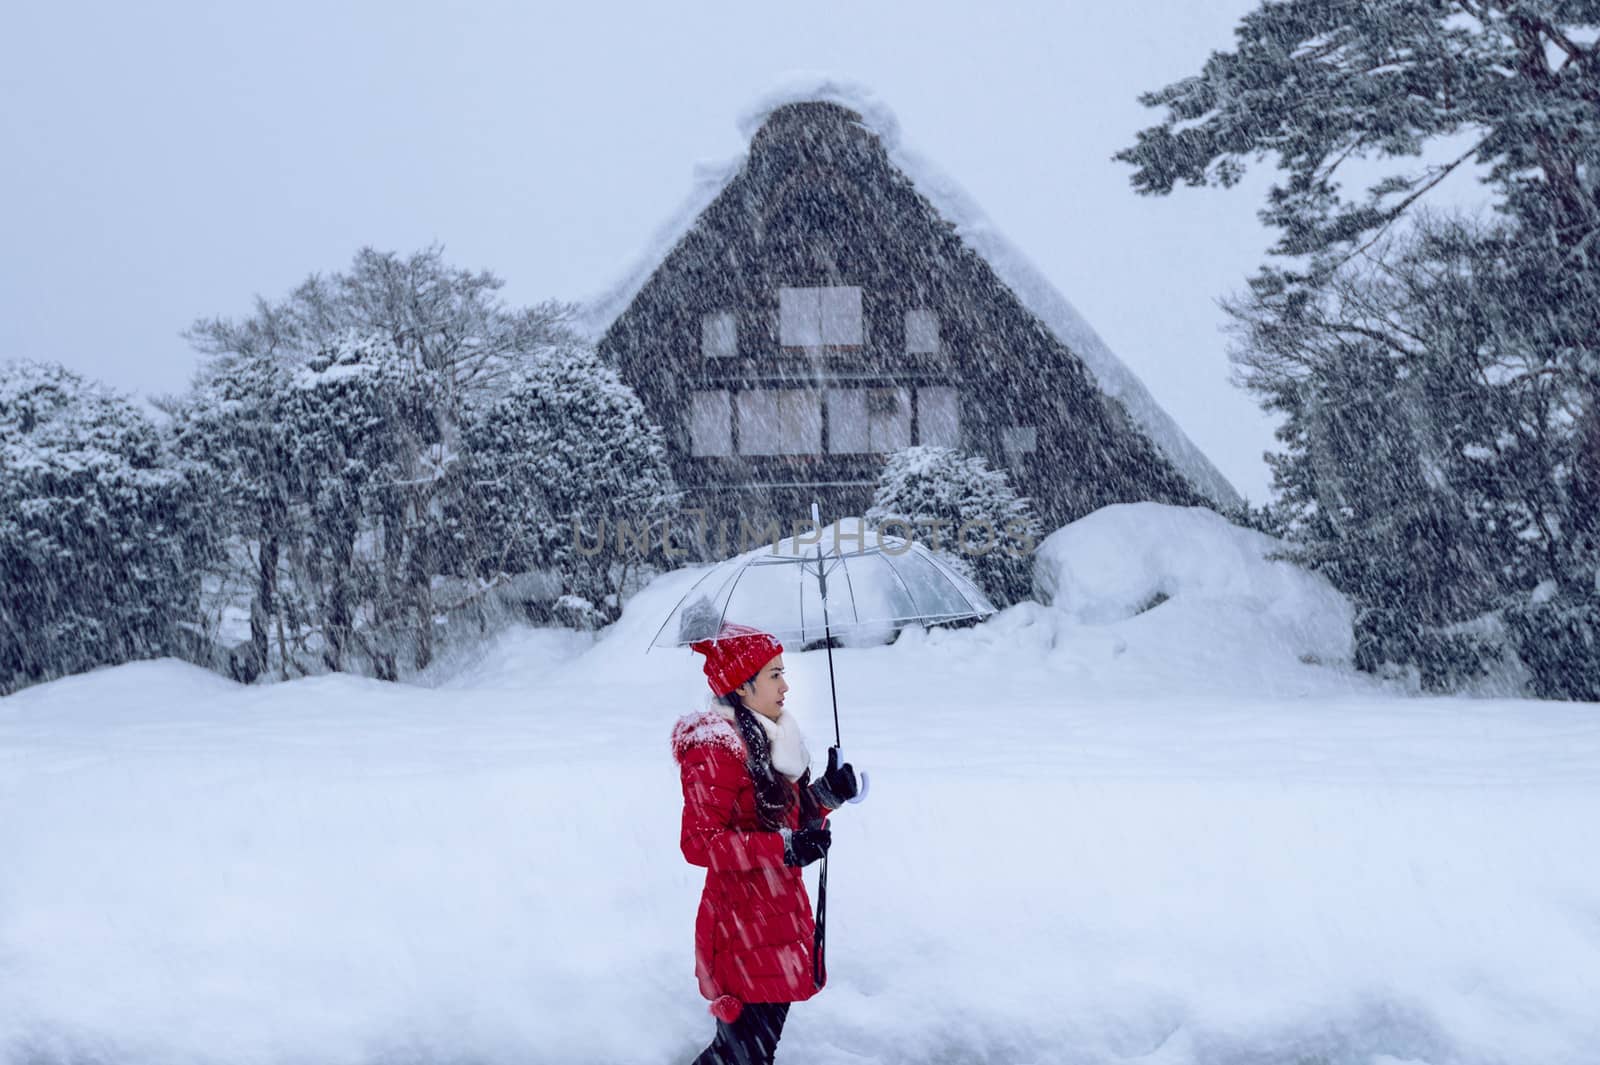 Young woman in Shirakawa-go village in winter, UNESCO world heritage sites, Japan.